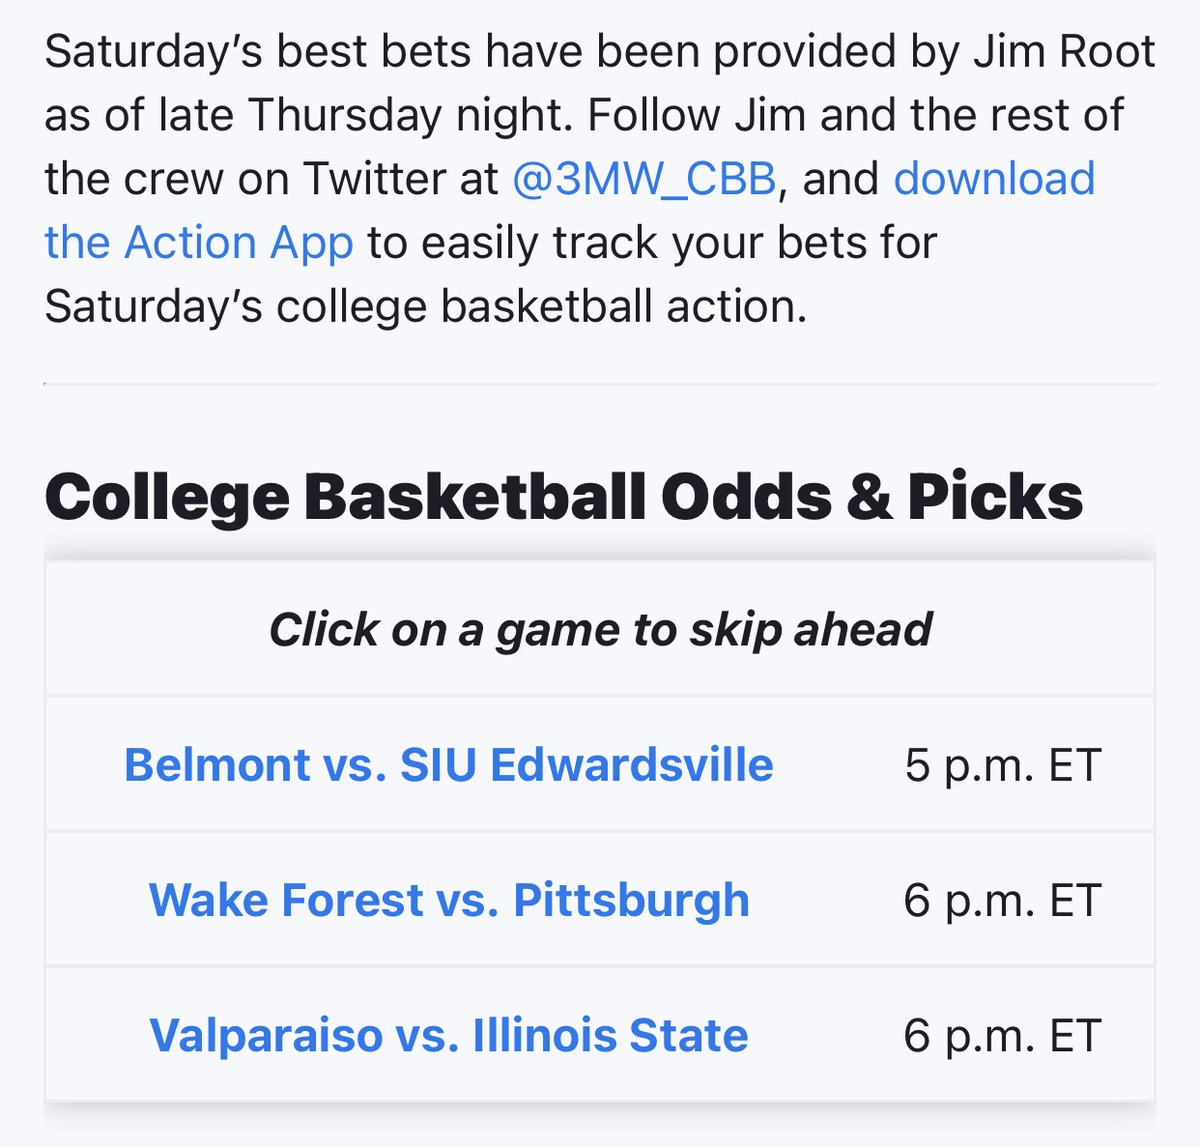 ⚪️ Belmont -17 (Play to -19)
⚪️ Wake Forest +4.5 (Play to +3)
⚪️ Valparaiso +1.5 (Play to -1)

@2ndChancePoints breaks down his best bets for today's loaded CBB slate ⤵️ 